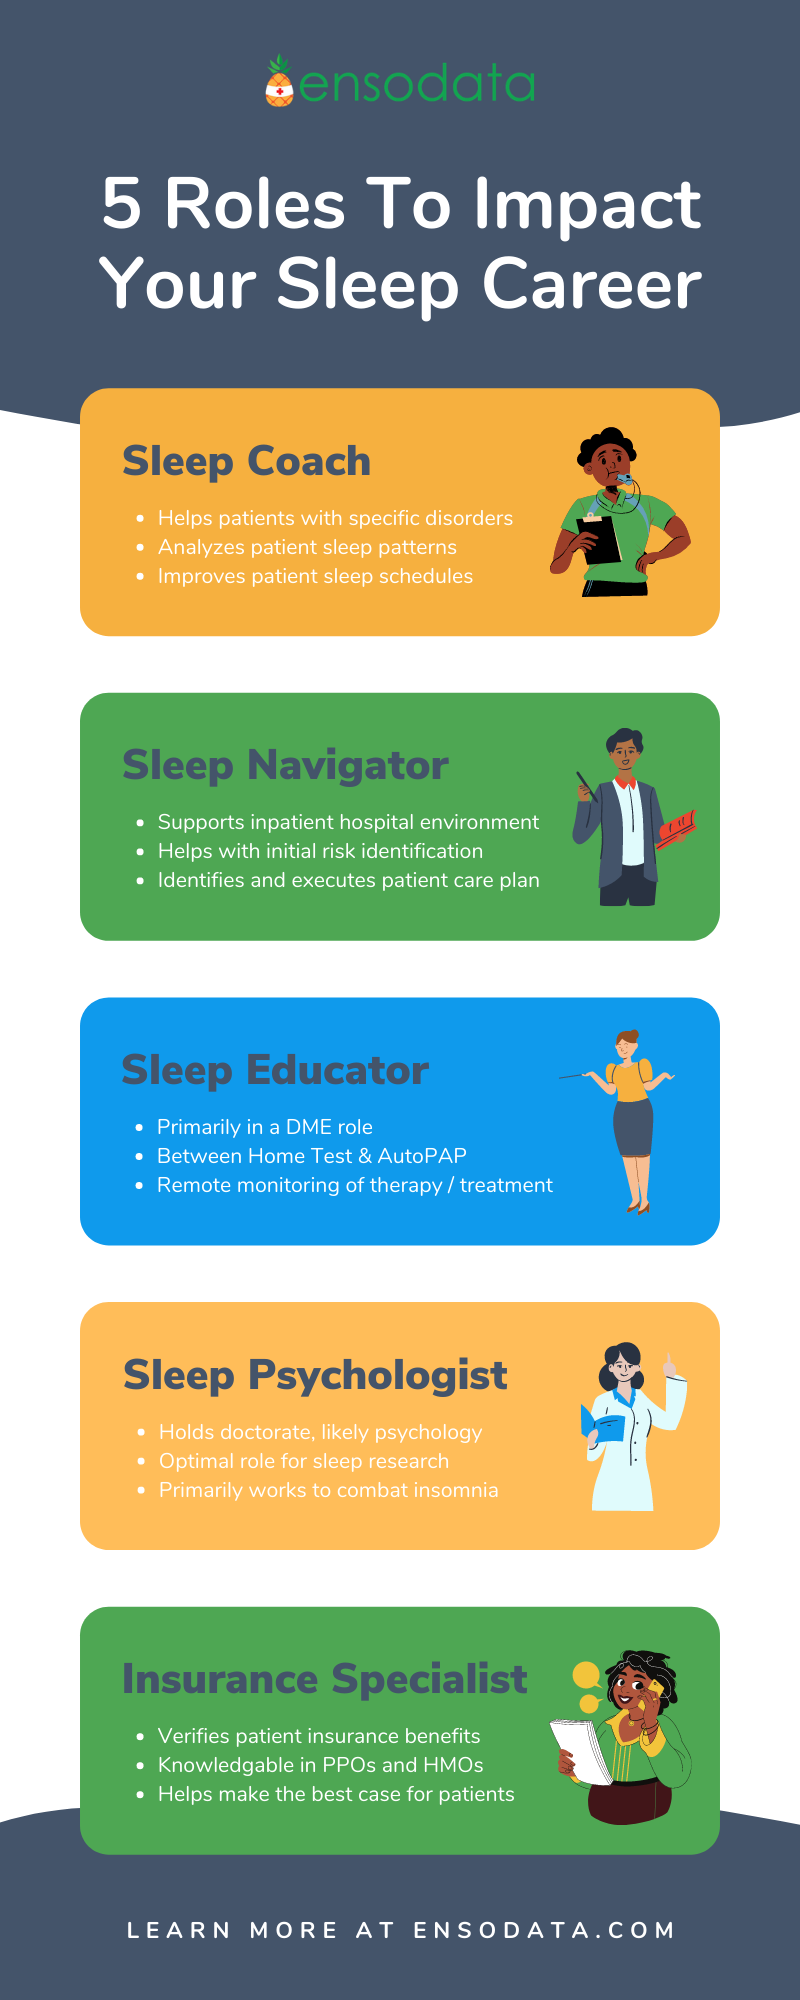 5 Roles To Impact Your Sleep Career (1)